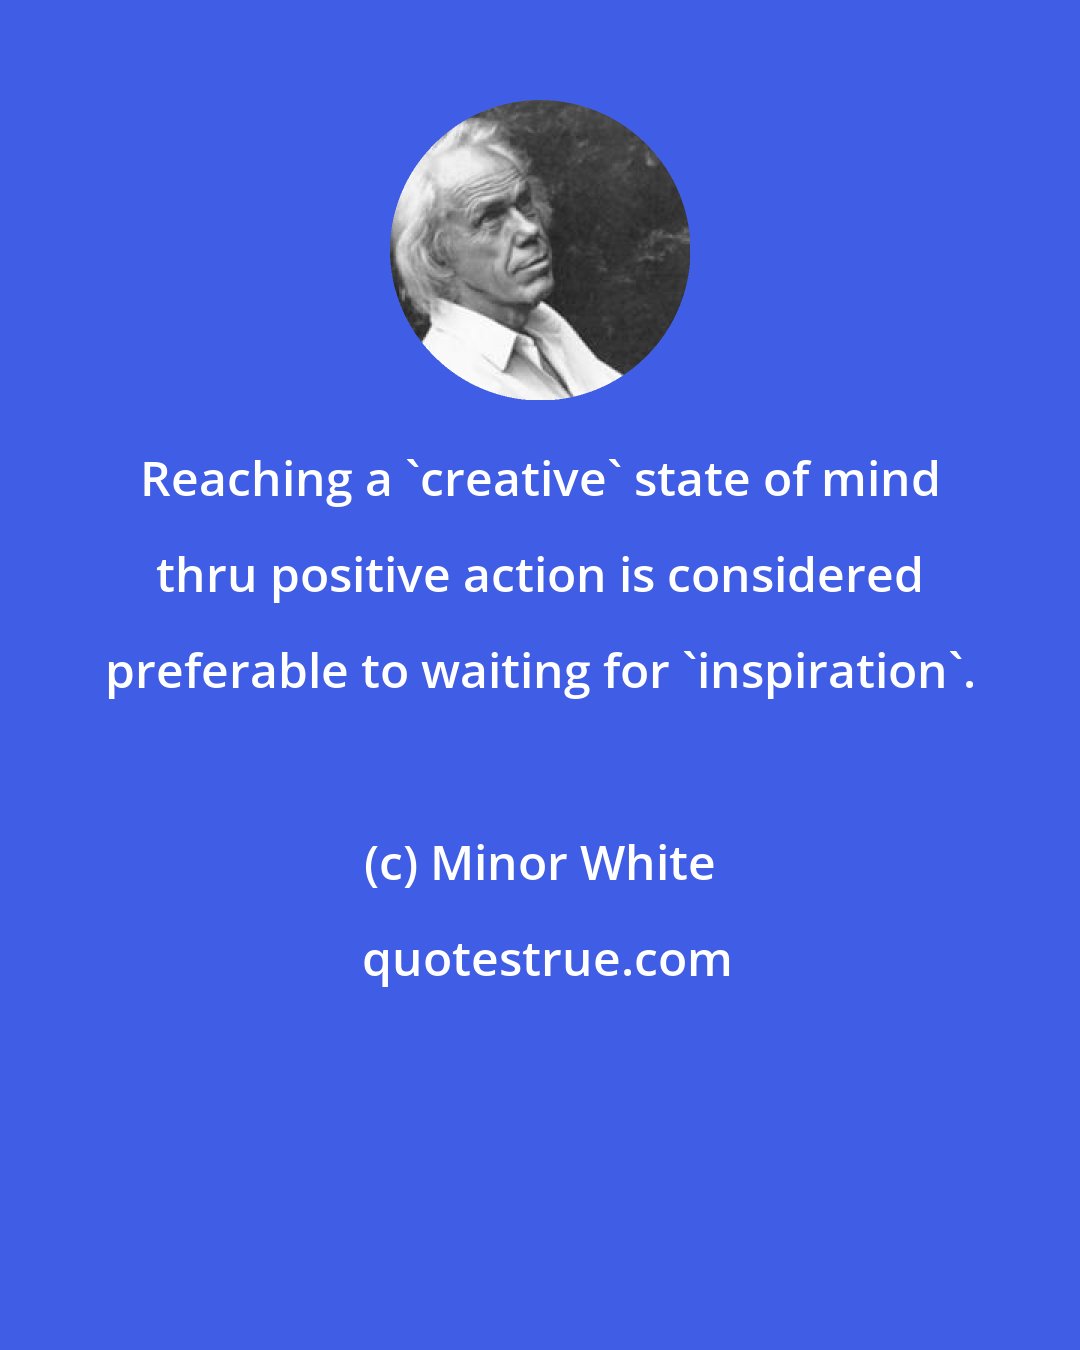 Minor White: Reaching a 'creative' state of mind thru positive action is considered preferable to waiting for 'inspiration'.